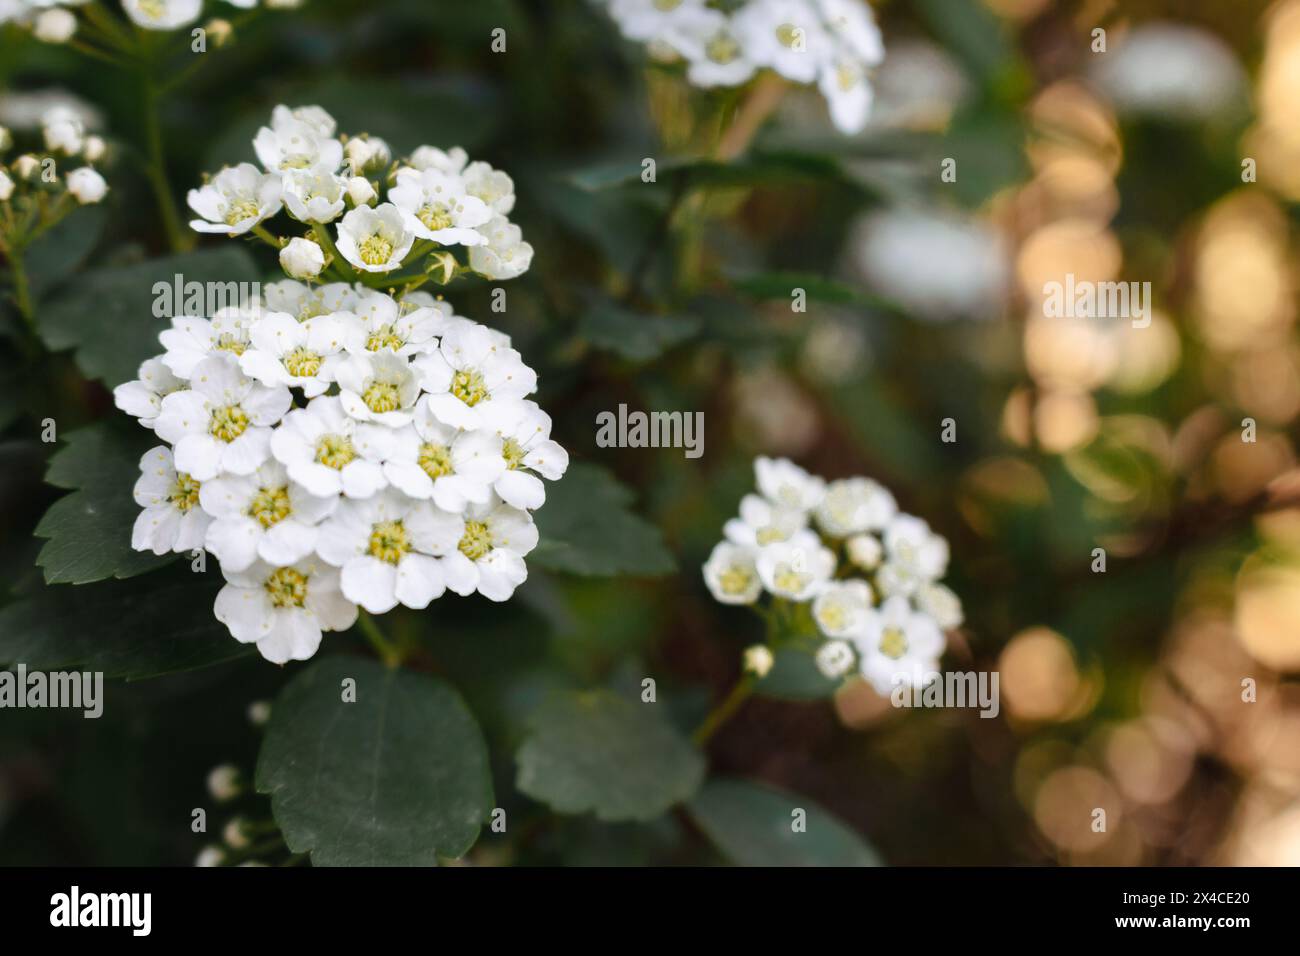 Spirea bush with delicate white flowers. Springtime nature. Spring park landscape. May flower. Beauty in nature. White spirea in bloom. Stock Photo